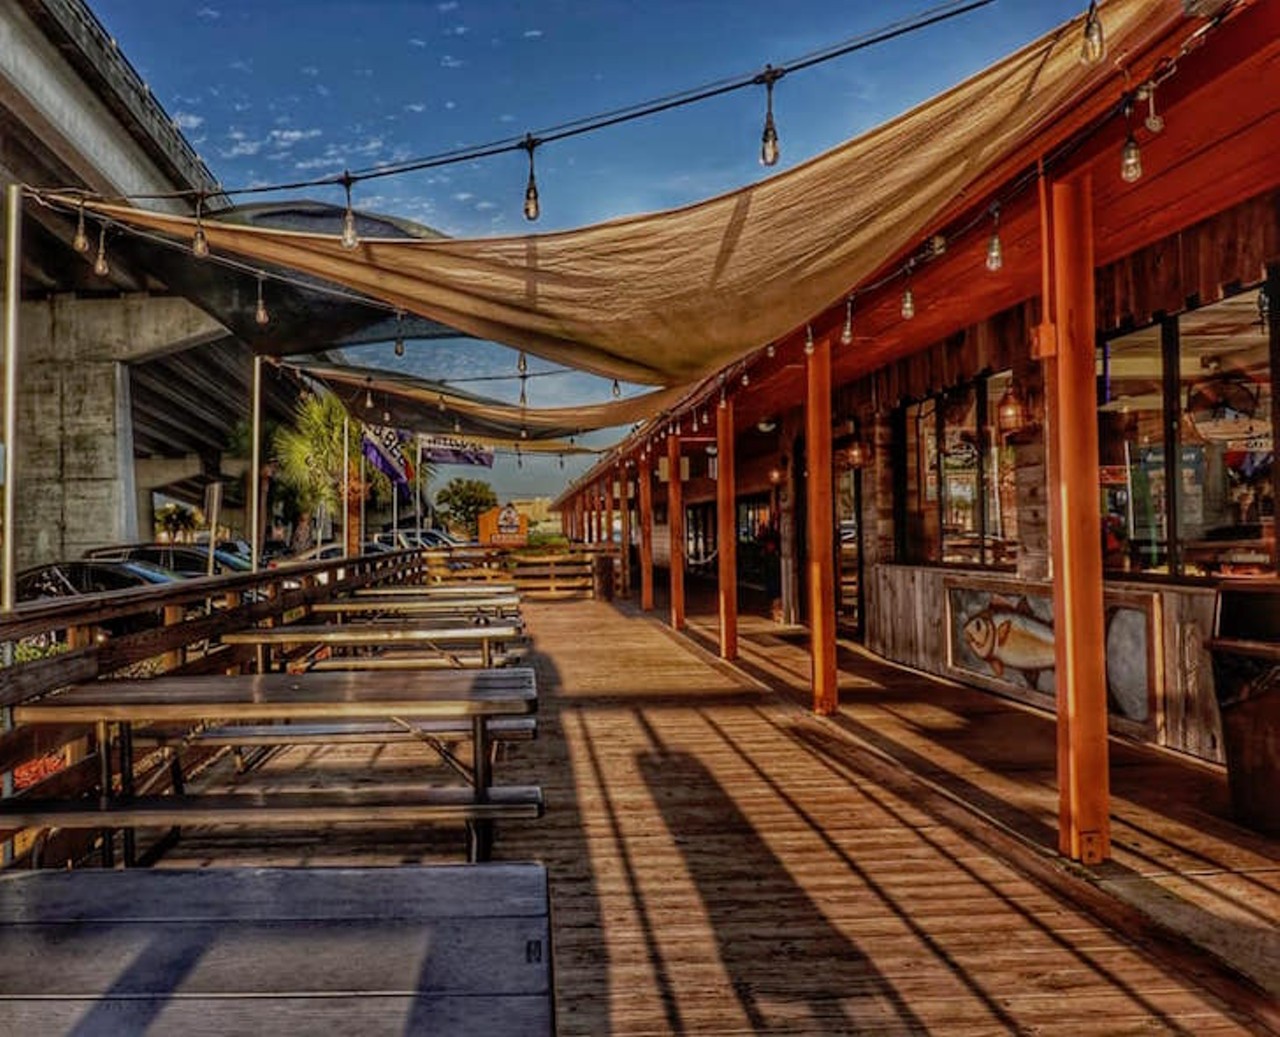 Our Deck Down Under
78 Dunlawton Ave., Port Orange, 386-767-1881
Volusia county favorite seafood shack includes a full bar and a boat dock for easy river access.
Photo via Our Deck Down Under/FB